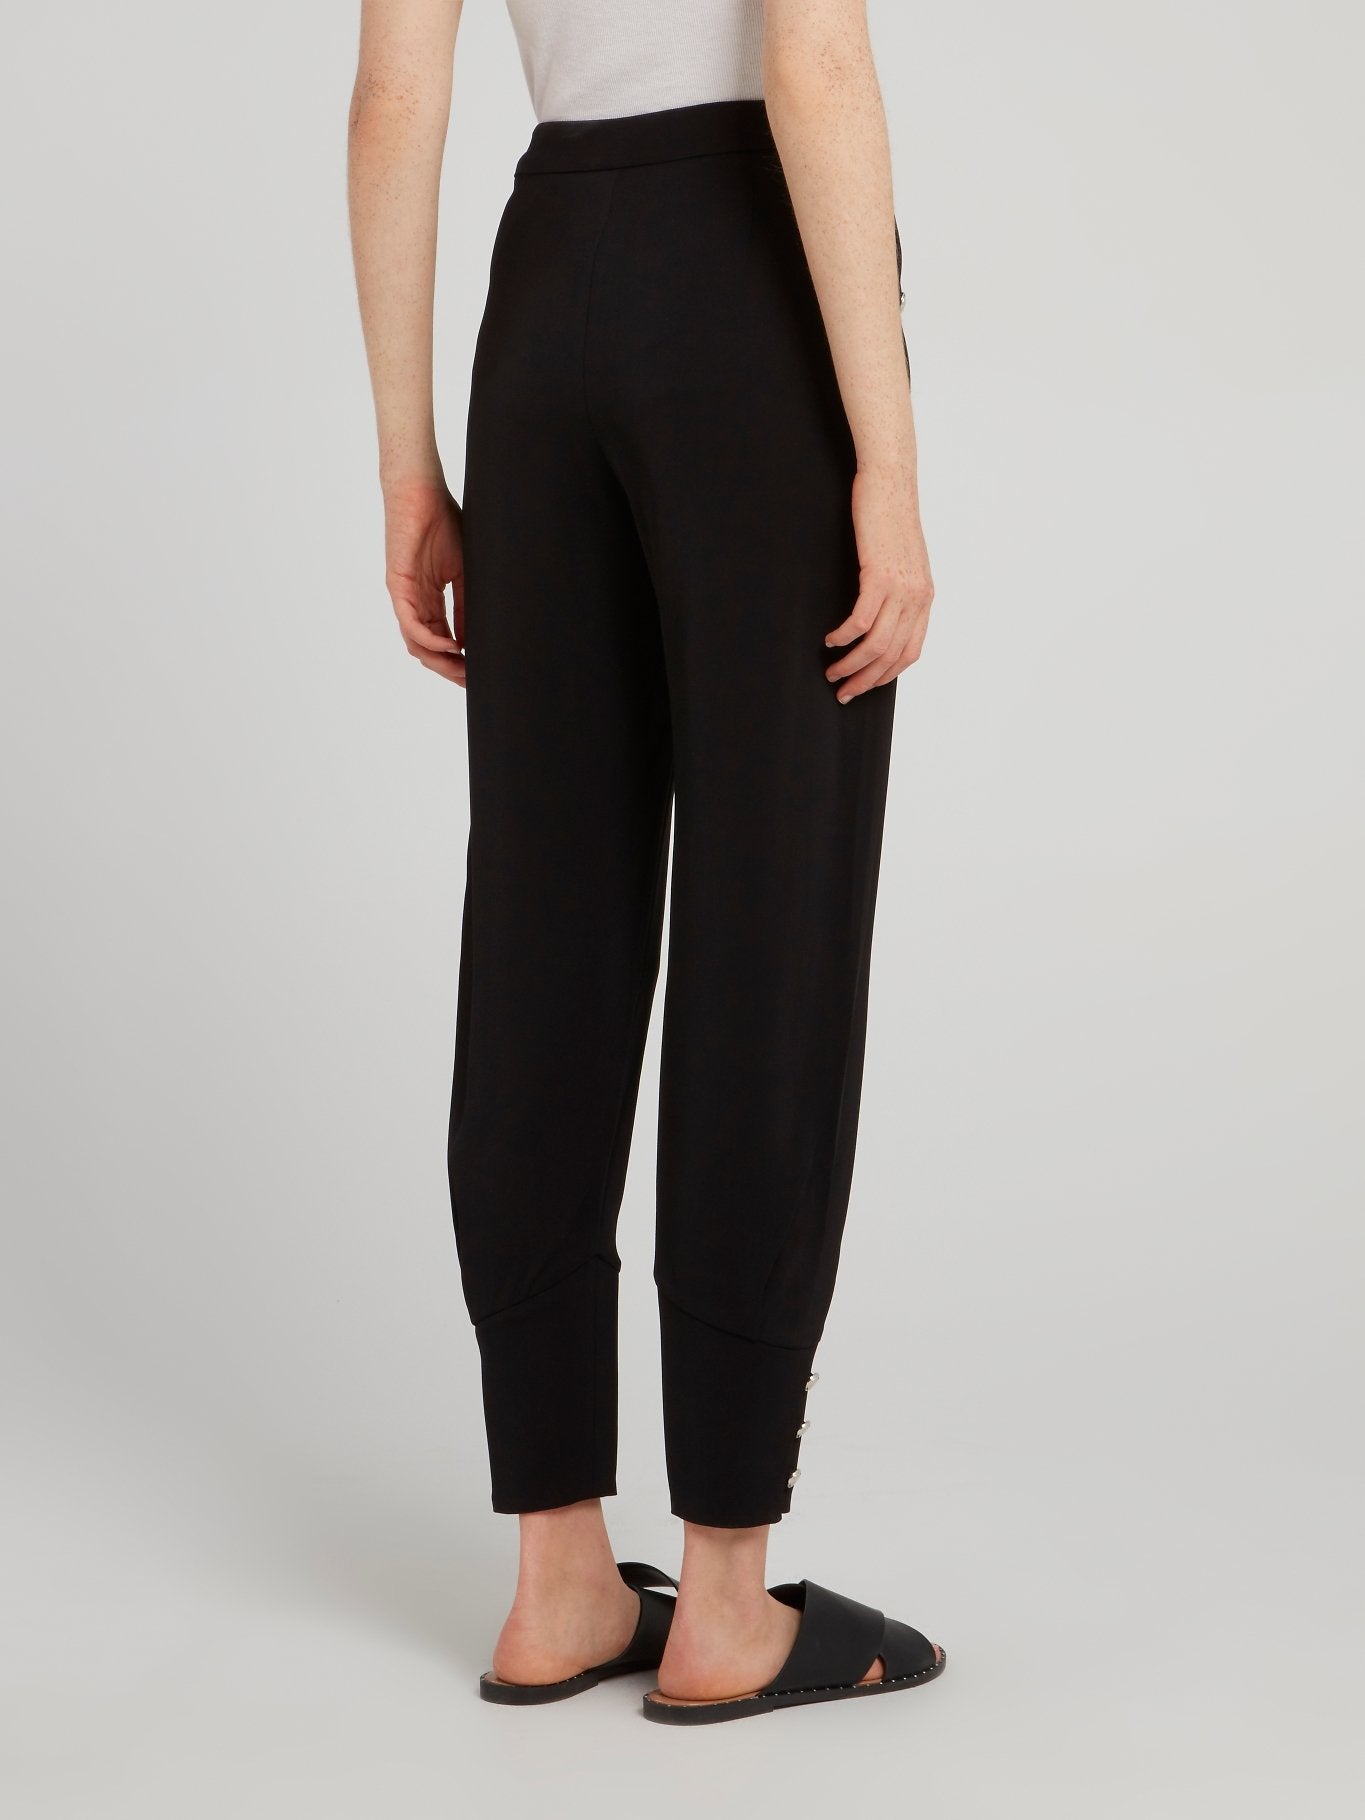 Black Cuffed Tapered Pants